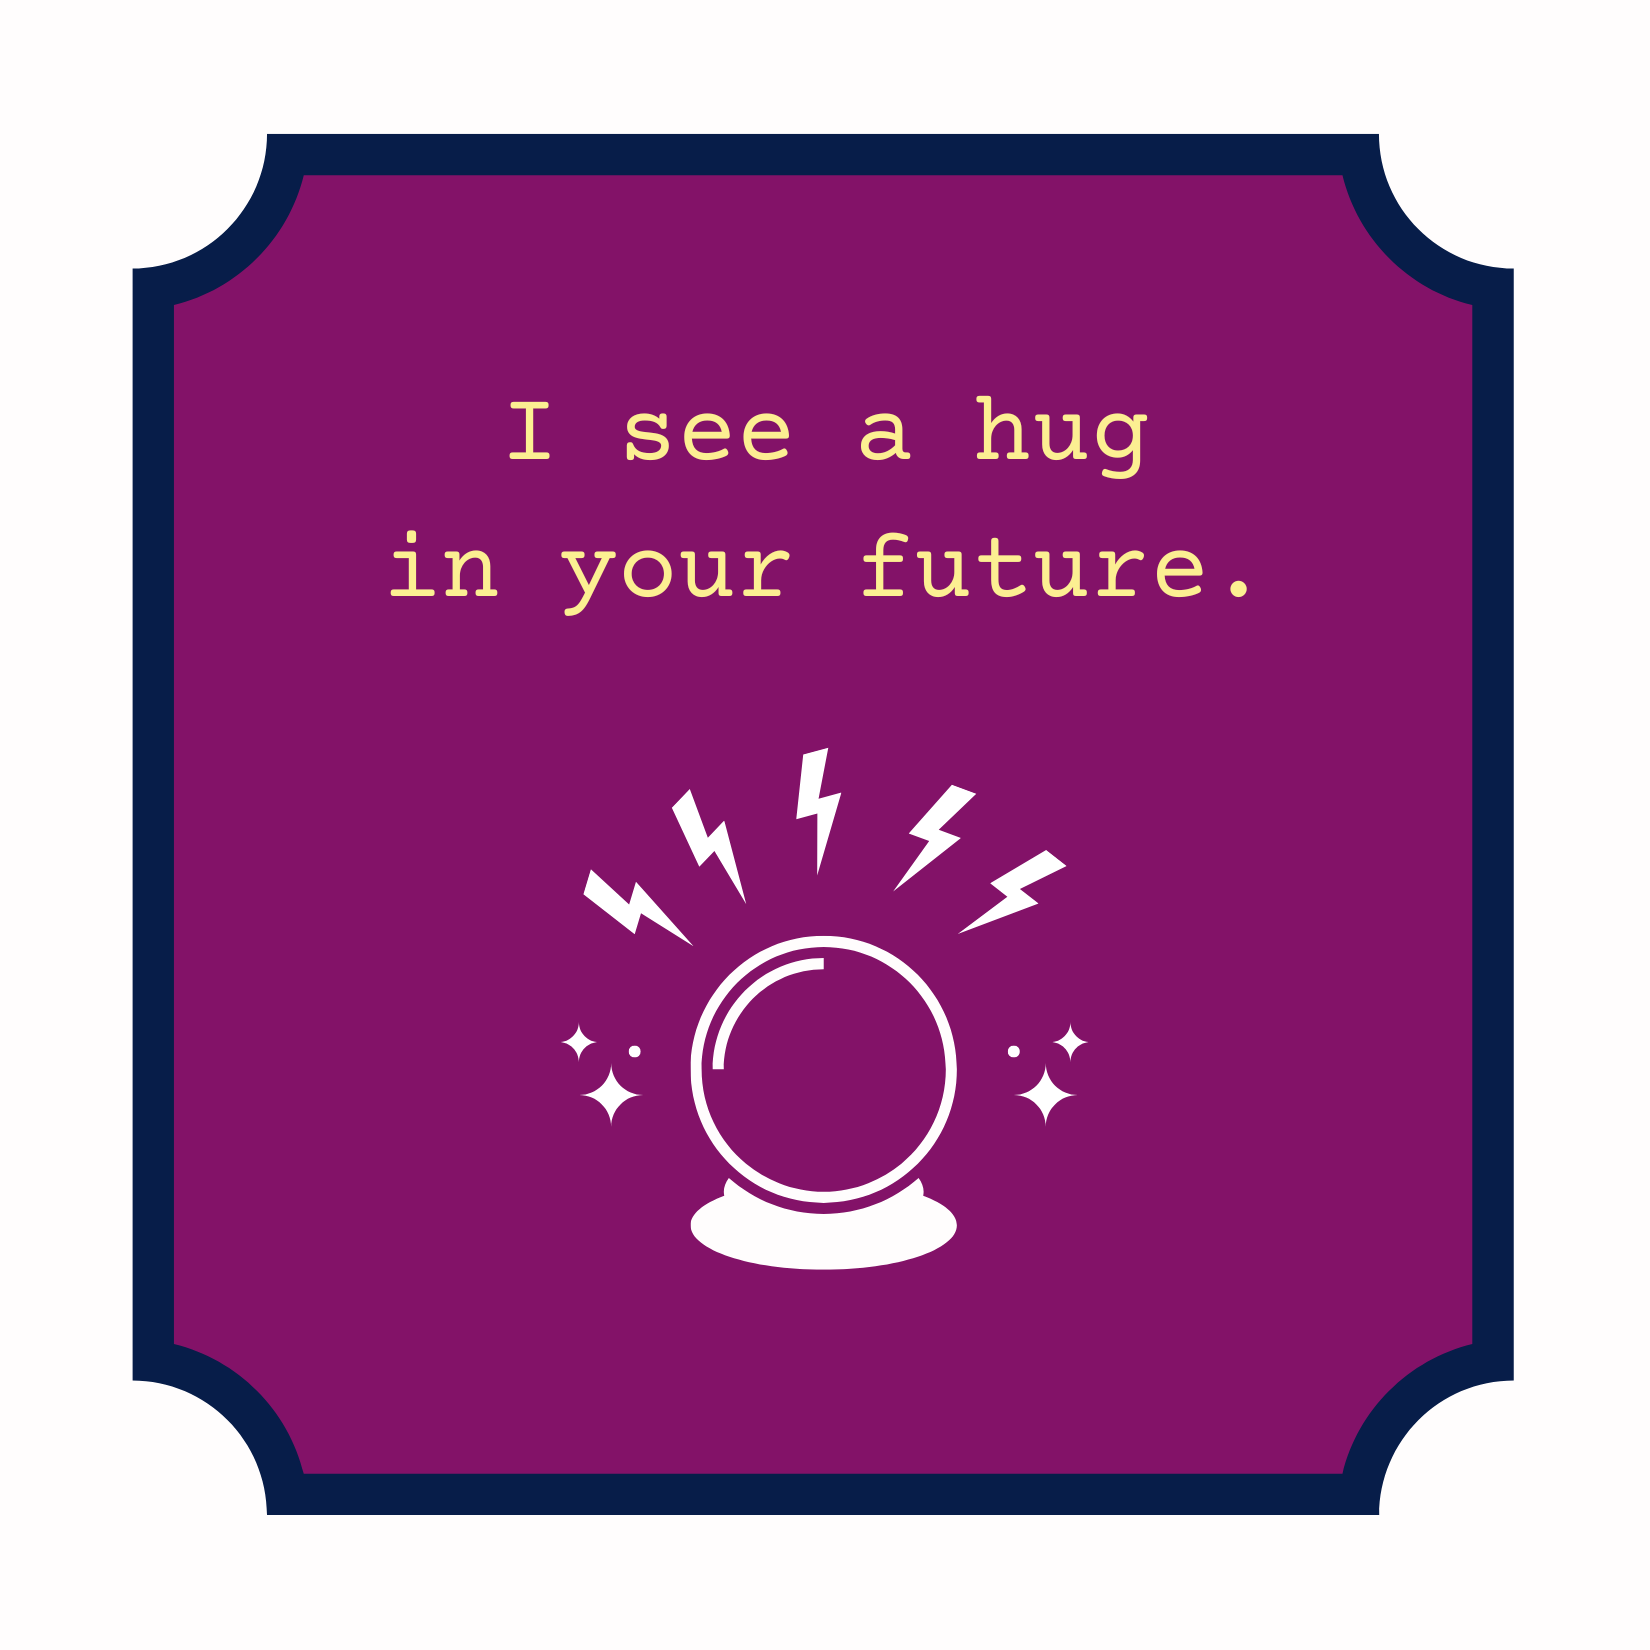 I see a hug in your future.